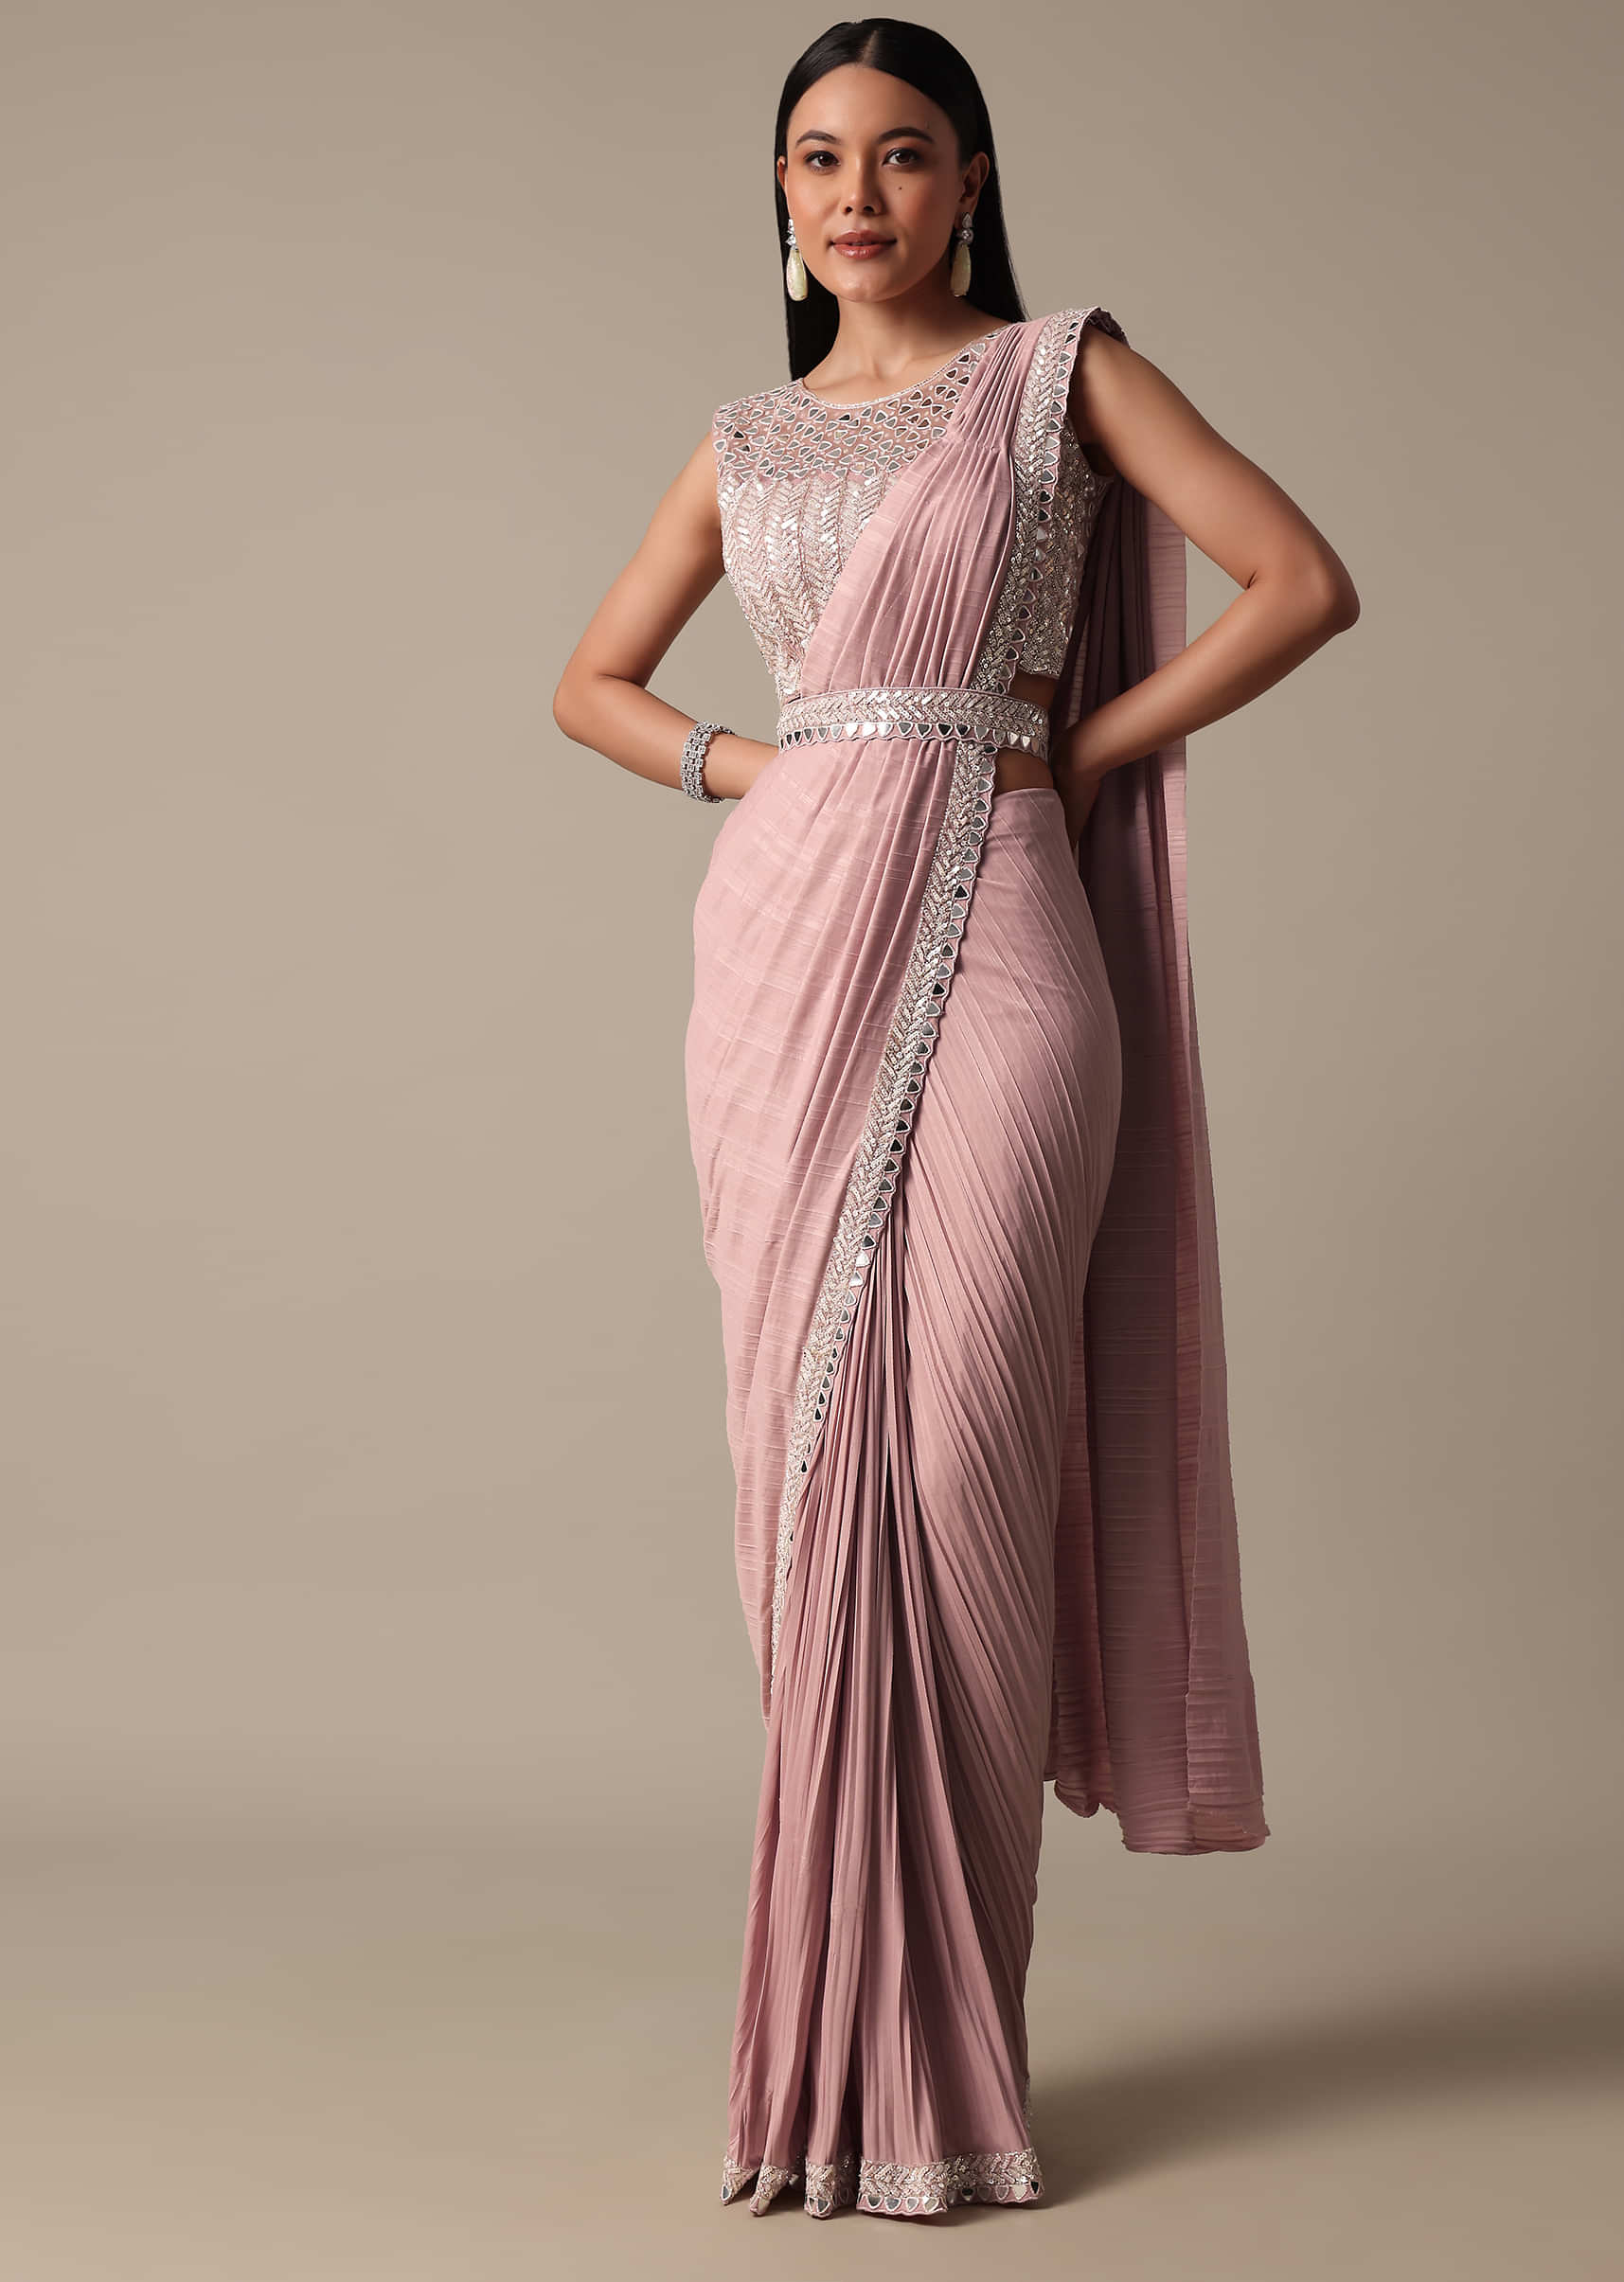 Ready To Wear Saree Styles To Ace Your Ethnic Fashion Game